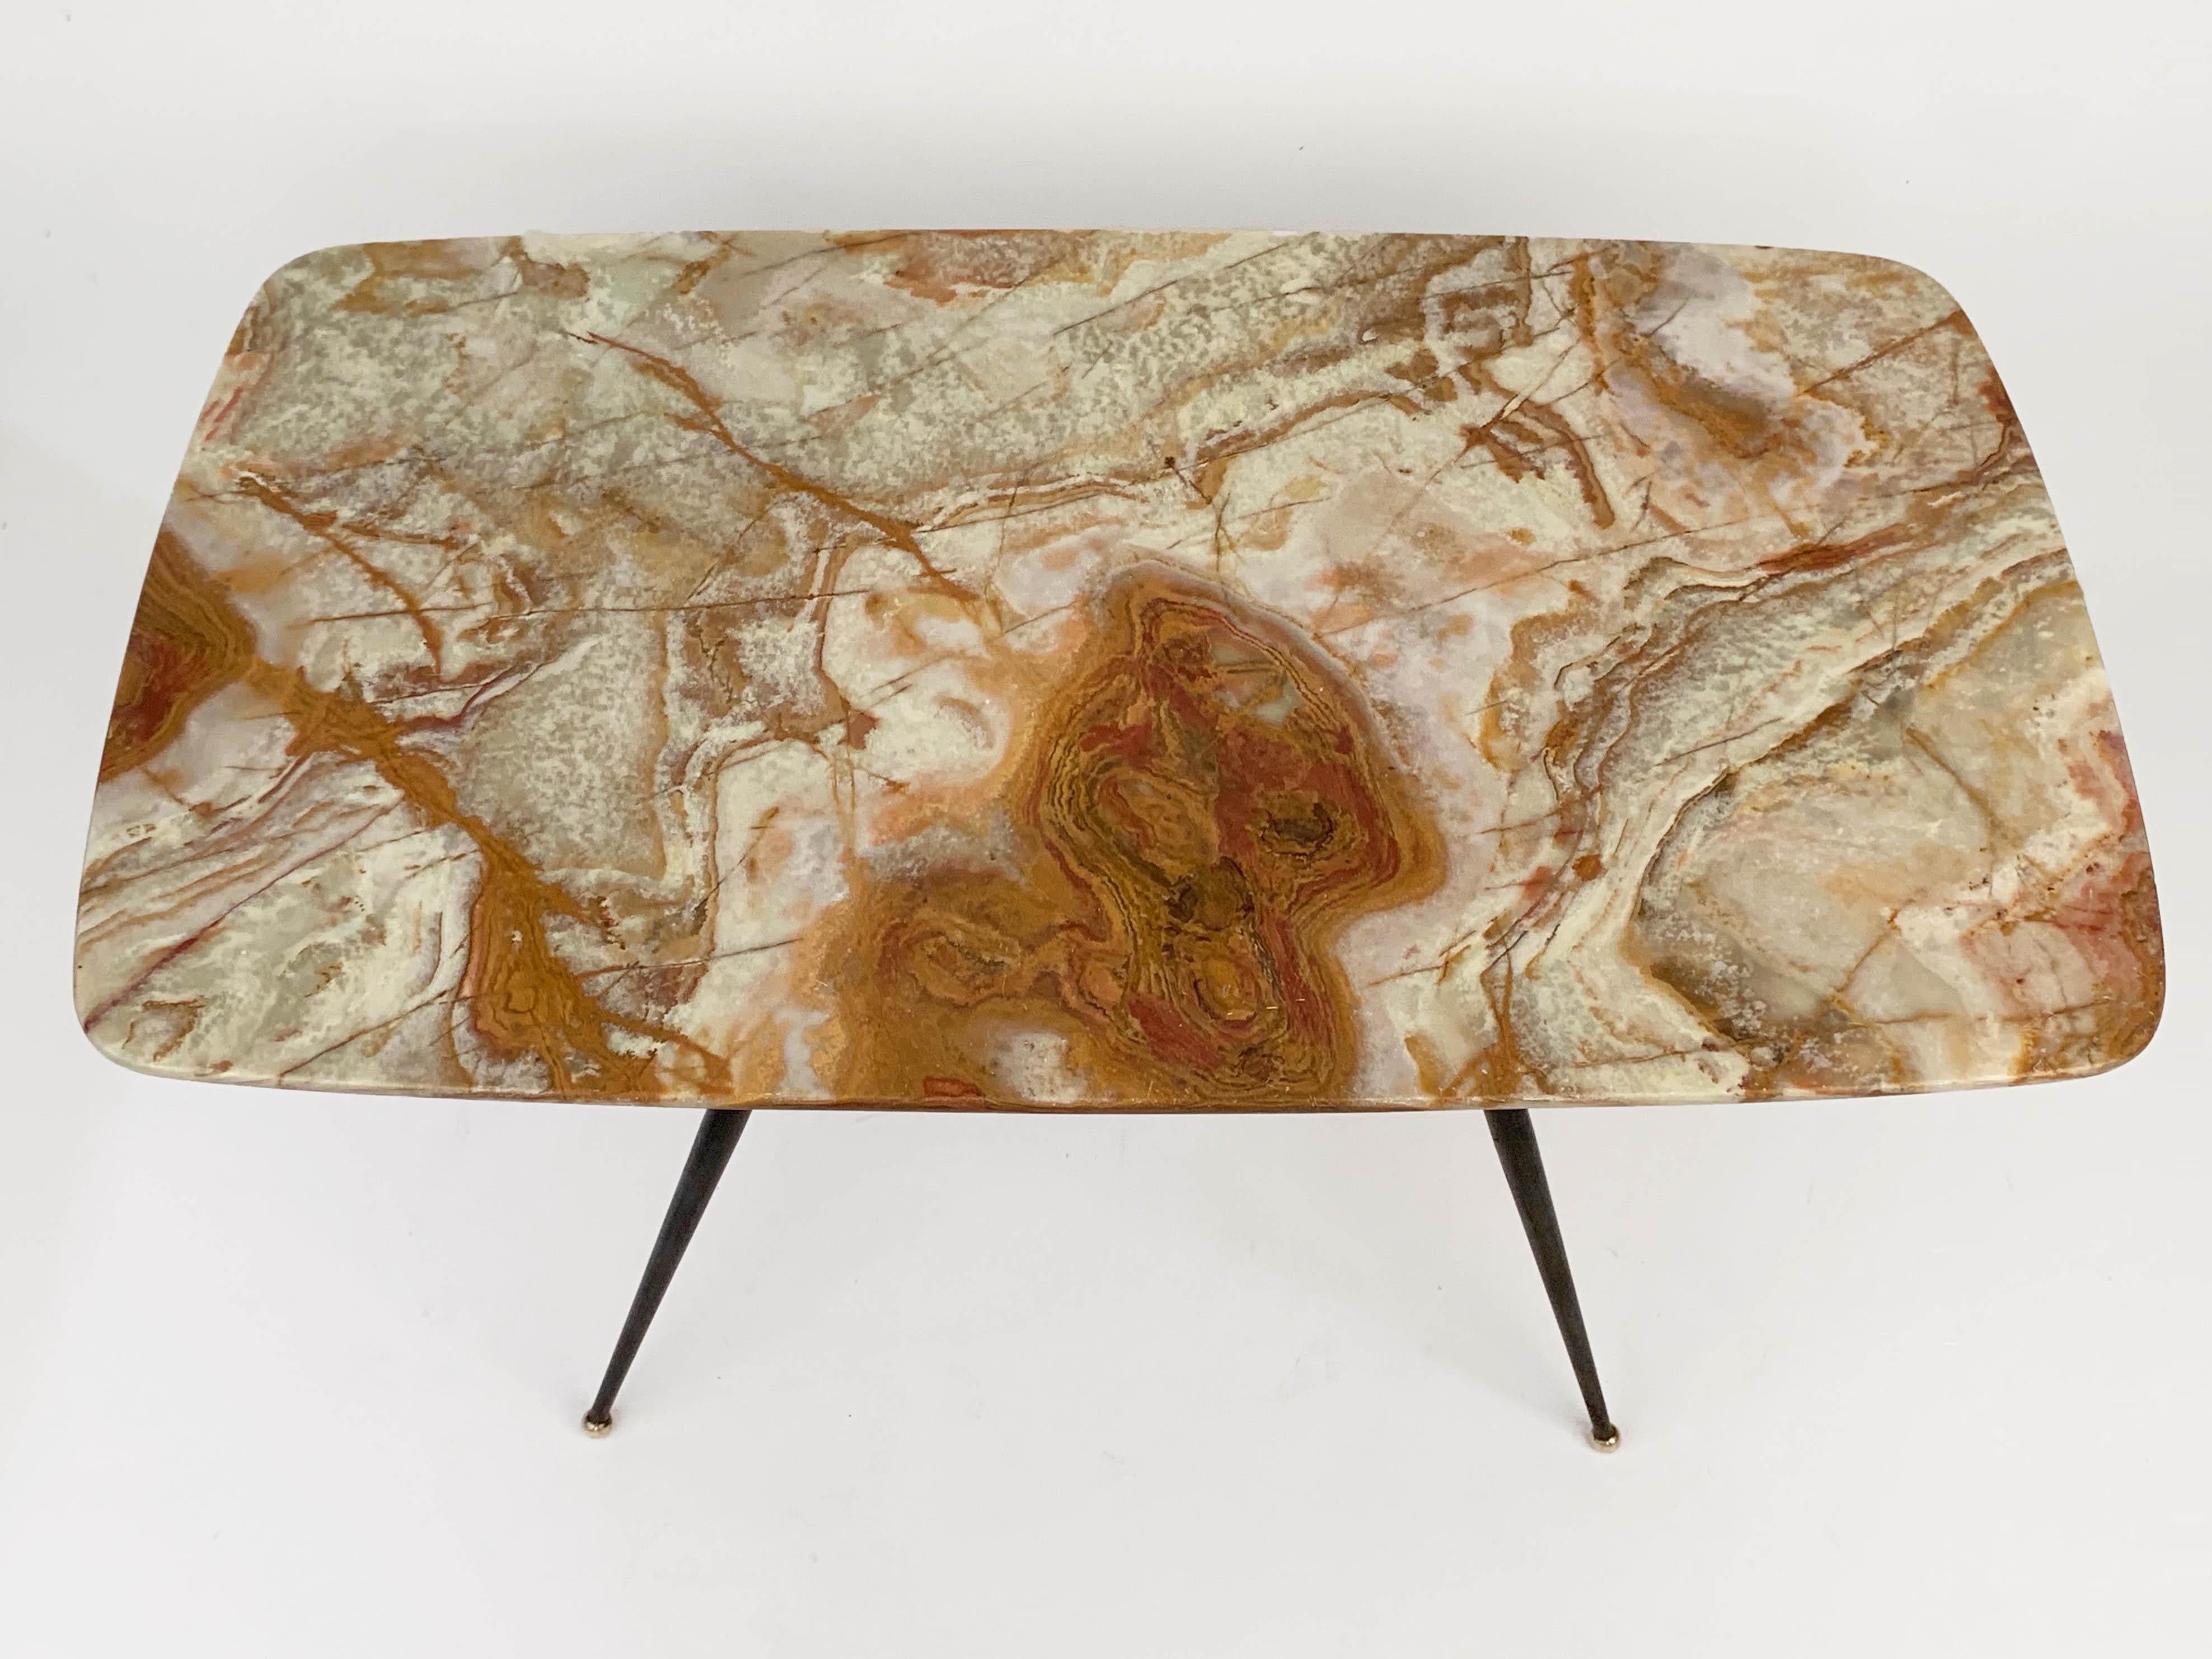 Lacquered Midcentury Pink and Green Onyx Marble Italian Coffee Table with Brass Feet 1950s